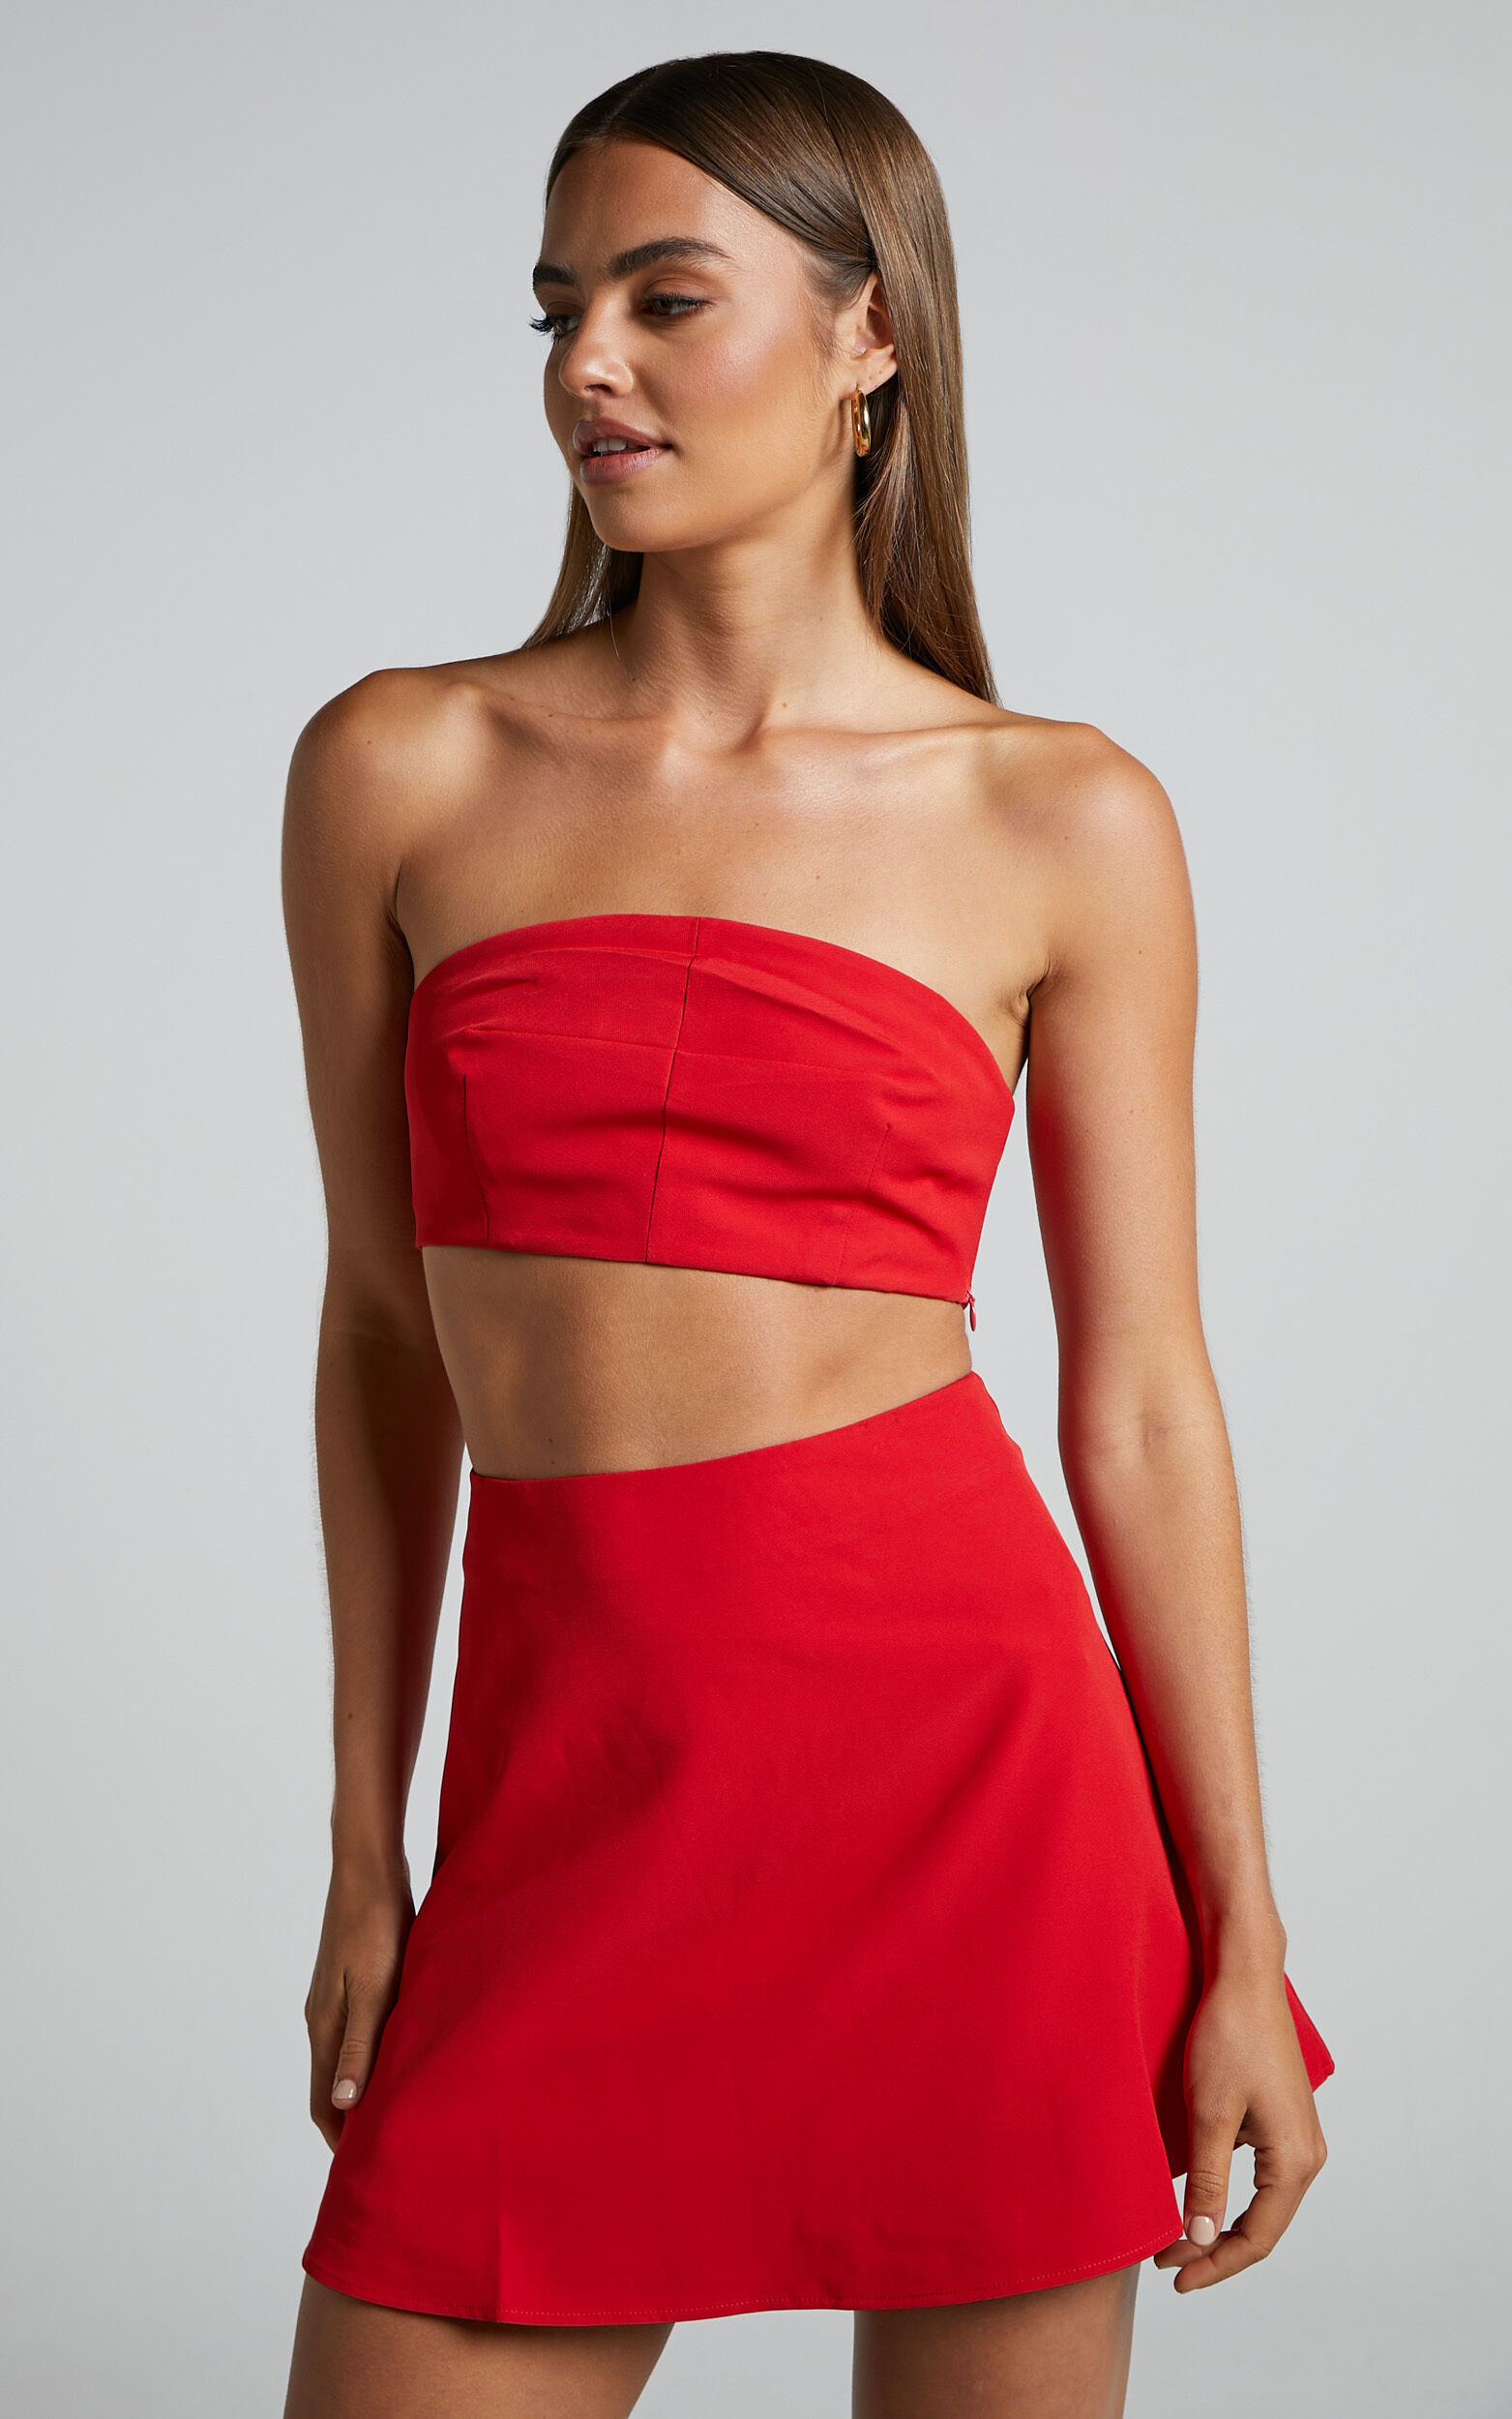 Khirara Two Piece Set - Strapless Bandeau Crop Top and Mini Skirt in Red - 04, RED1, super-hi-res image number null